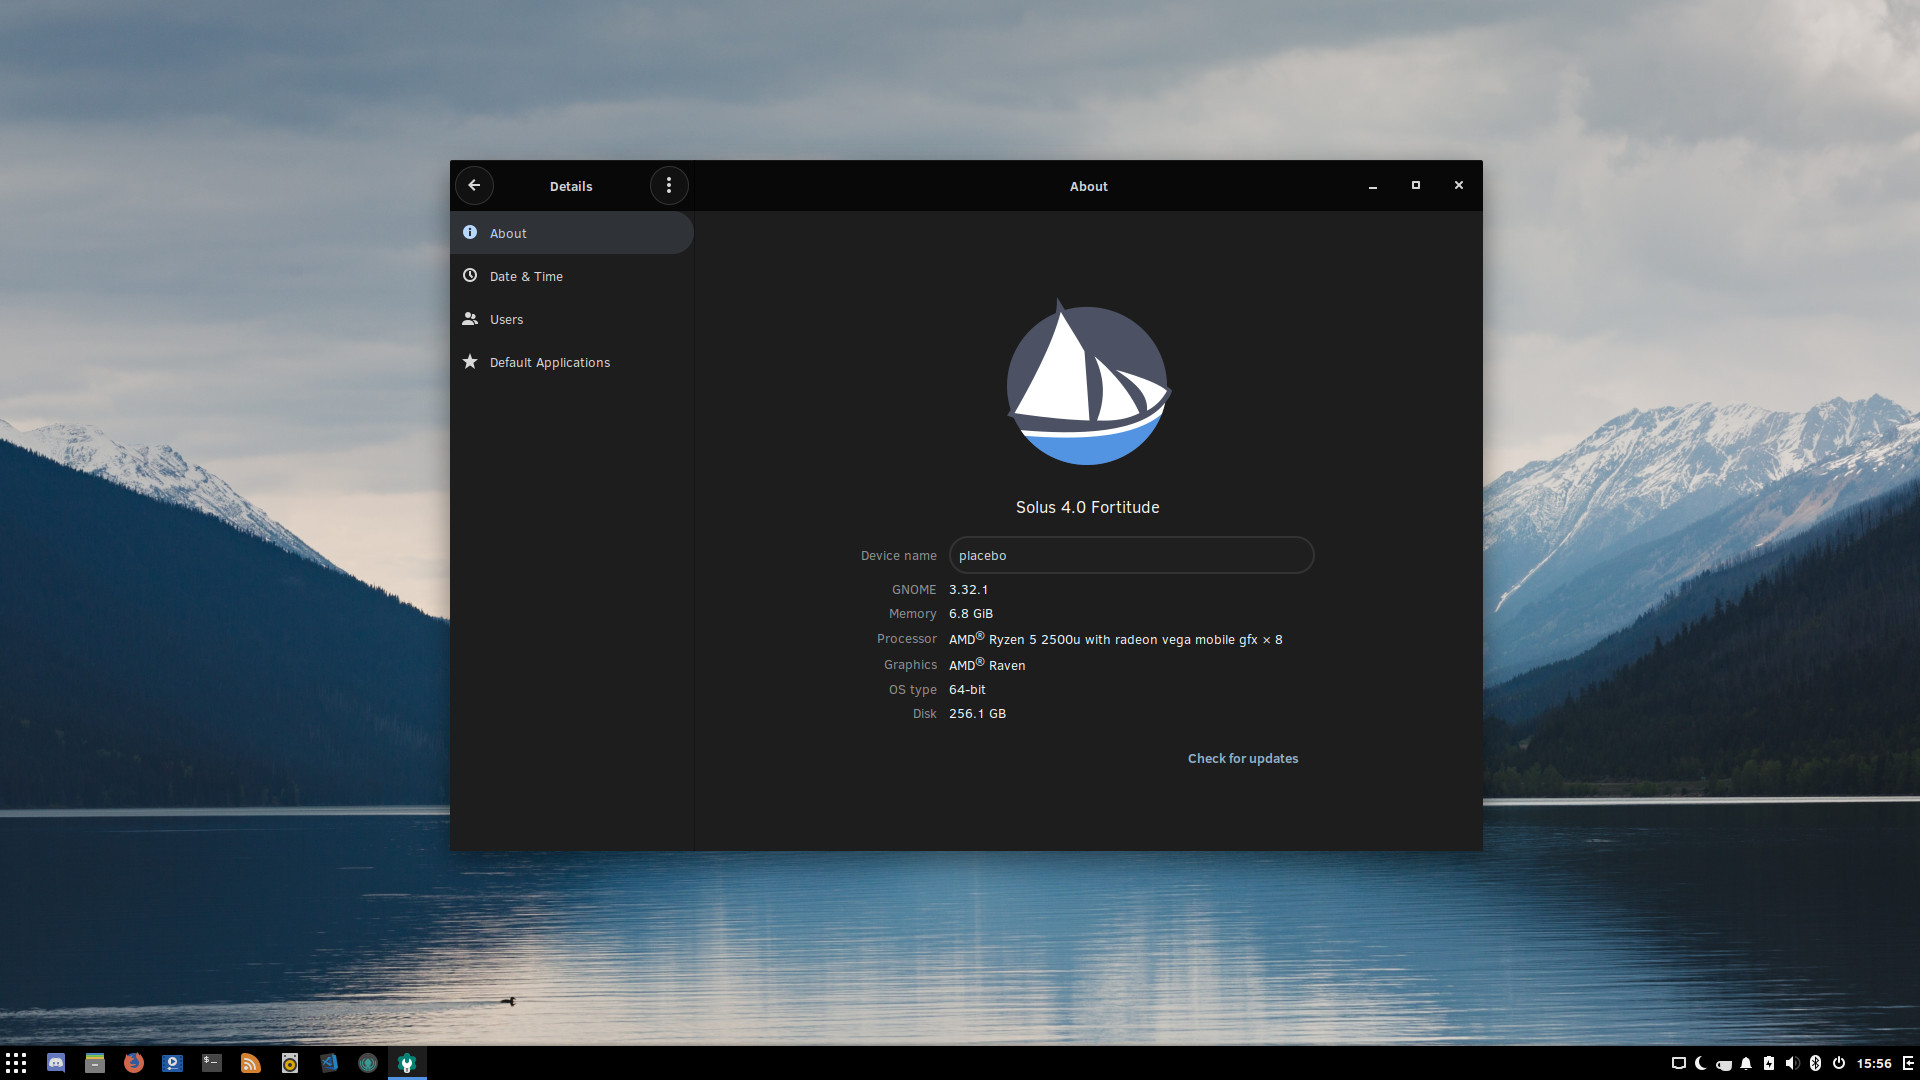 Budgie on Gnome 332